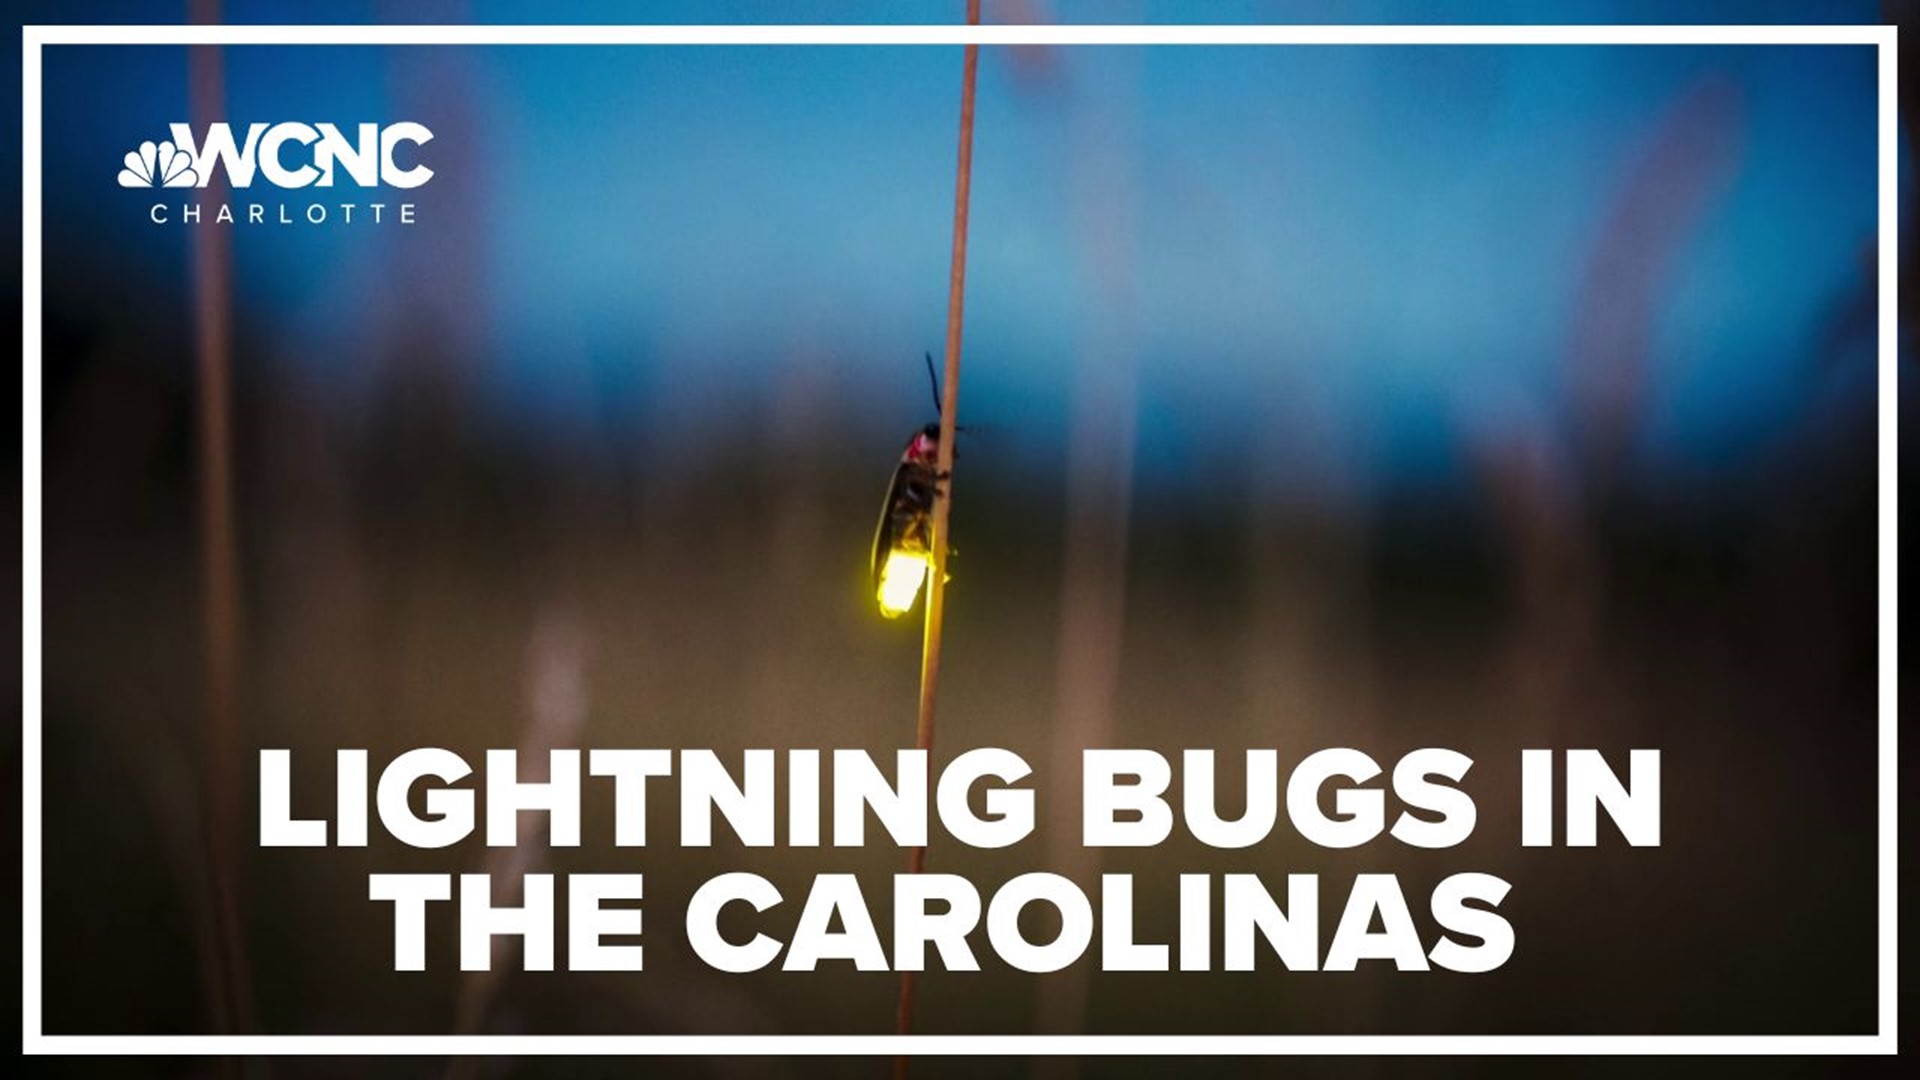 Whether you call them lightning bugs or fireflies, they're finally beginning to appear